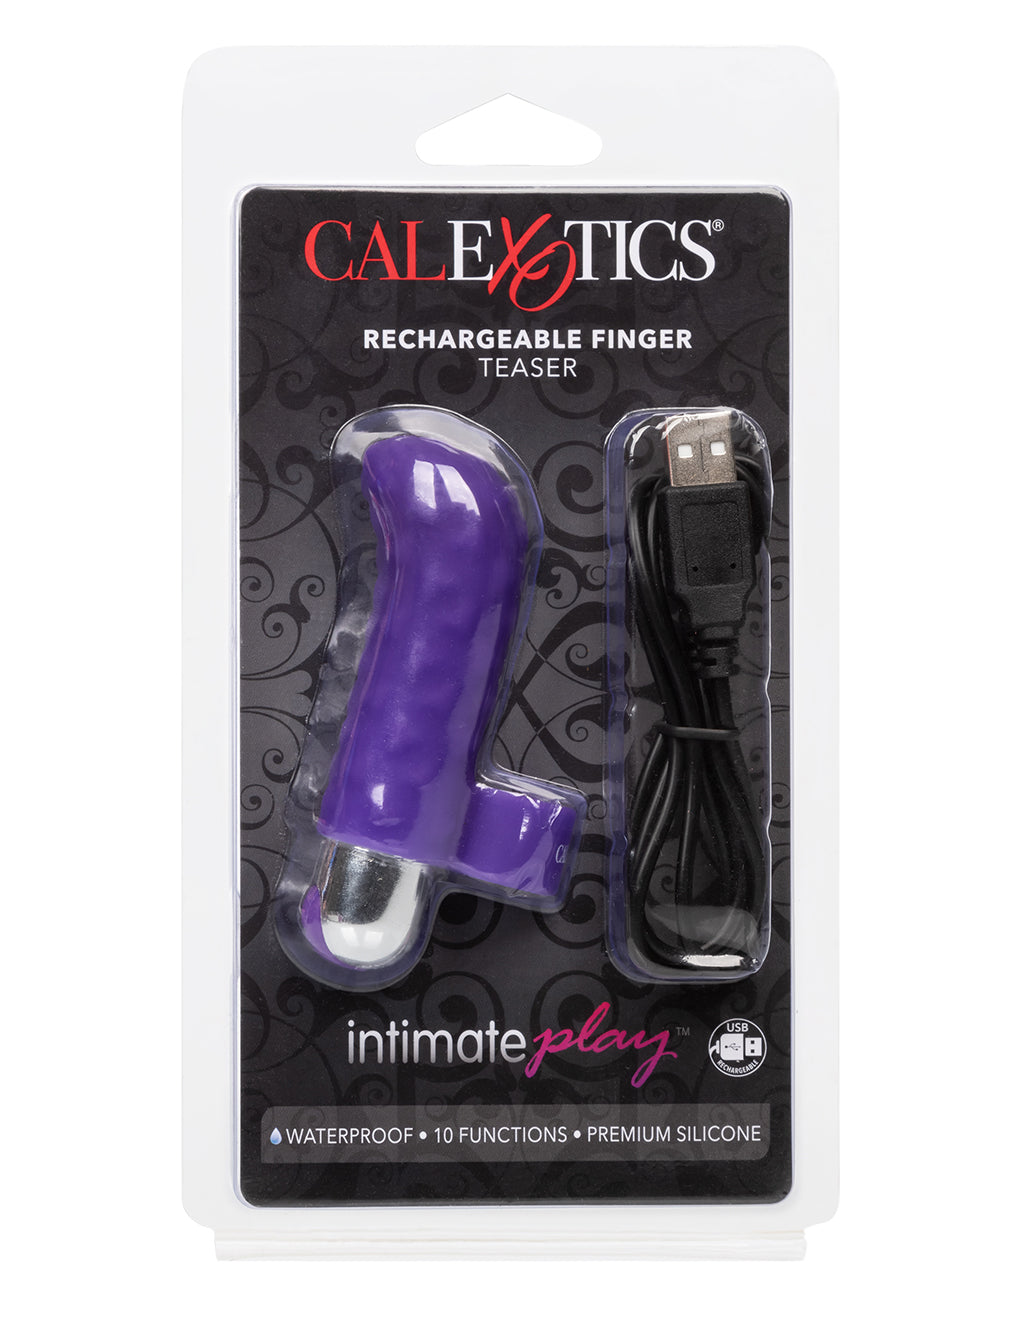 Intimate Play Rechargeable Finger Tease- package